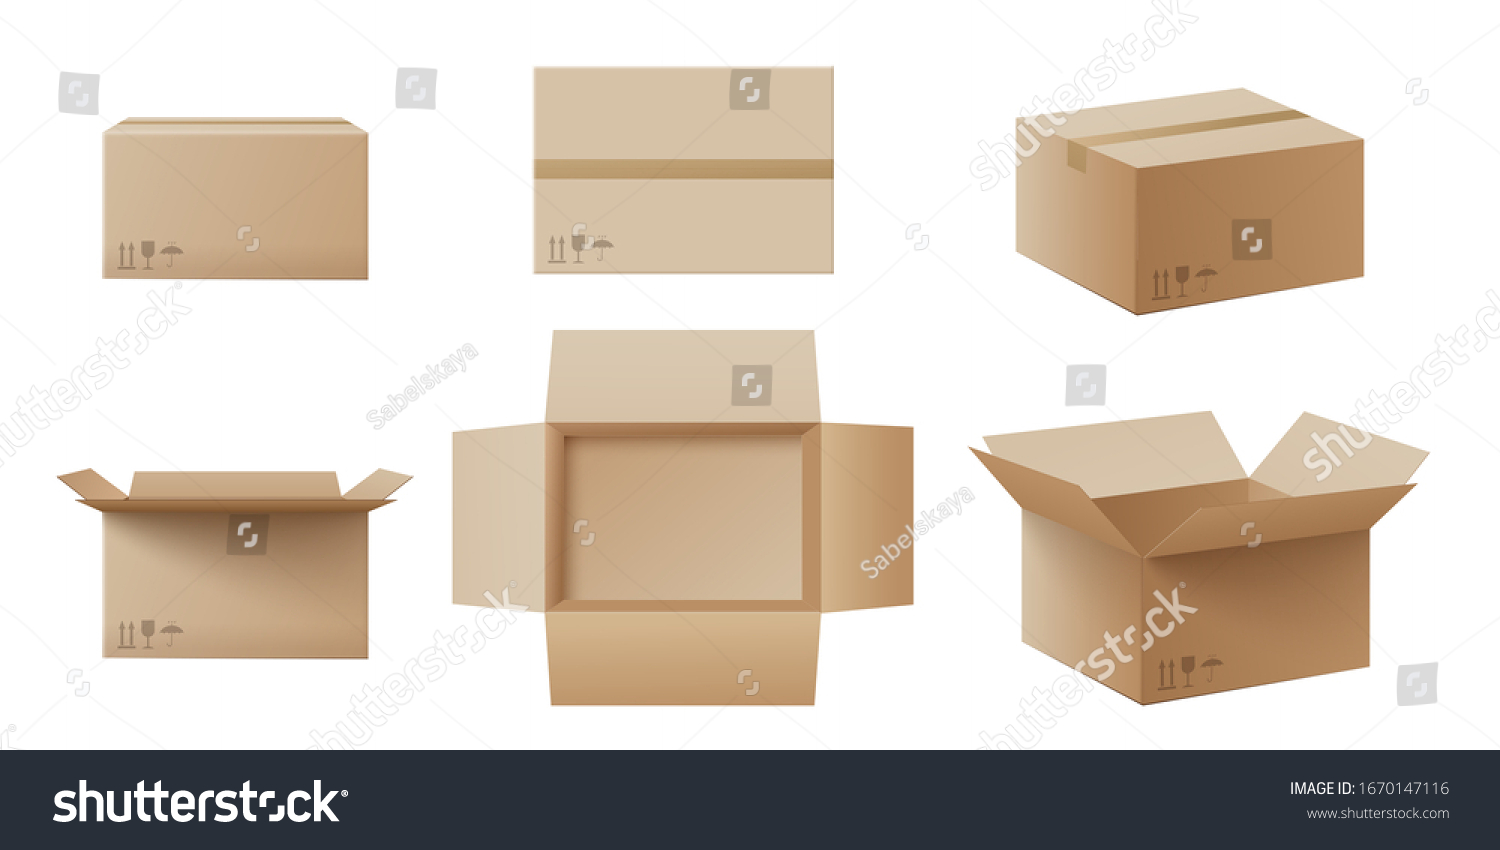 SVG of Realistic cardboard box mockup set from side, front and top view open and closed isolated on white background. Parcel packaging template - vector illustration. svg